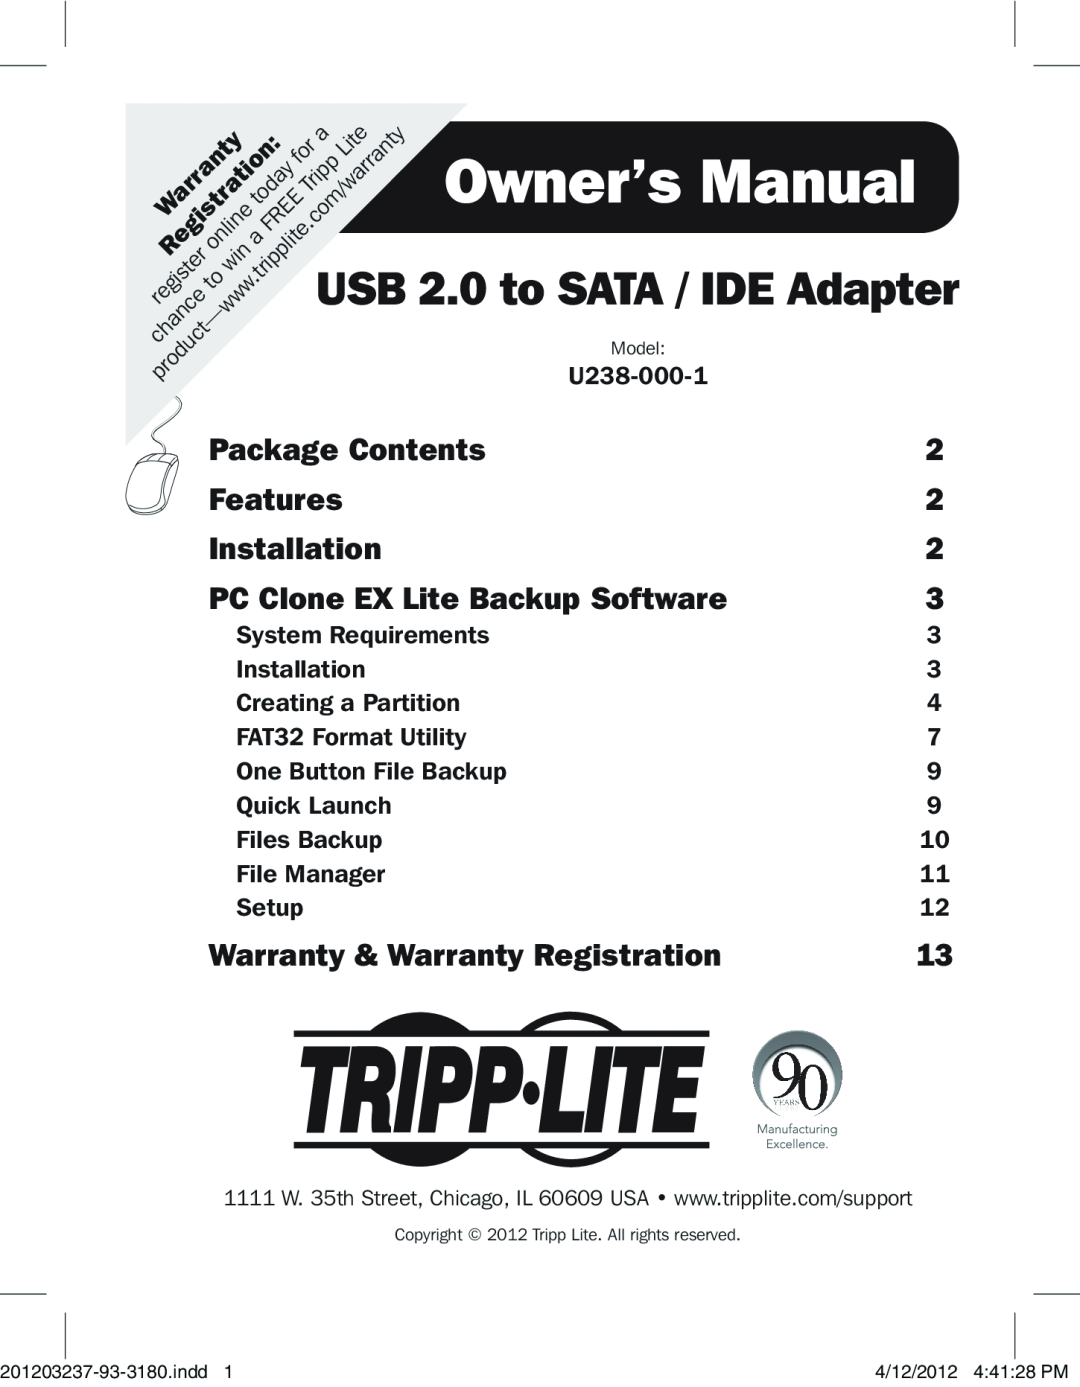 Tripp Lite U238-000-1 owner manual Package Contents, Features, Installation, PC Clone EX Lite Backup Software, Setup 